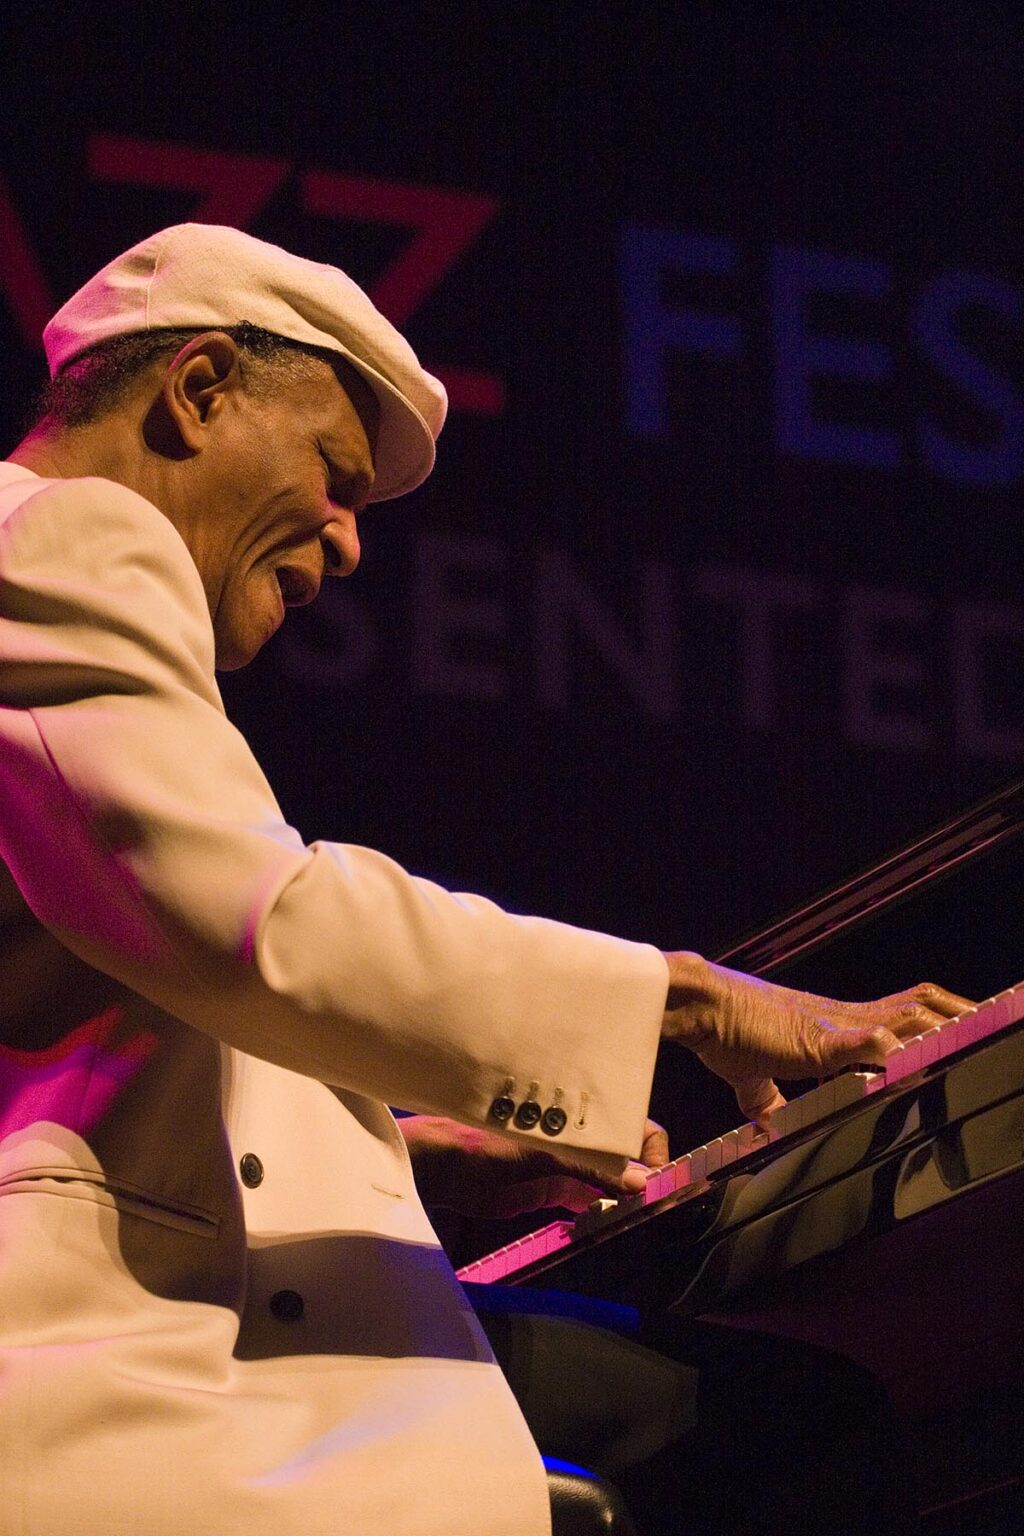 MCCOY TYNER (Piano) performs with the MCCOY TYNER TRIO at THE MONTEREY JAZZ FESTIVAL